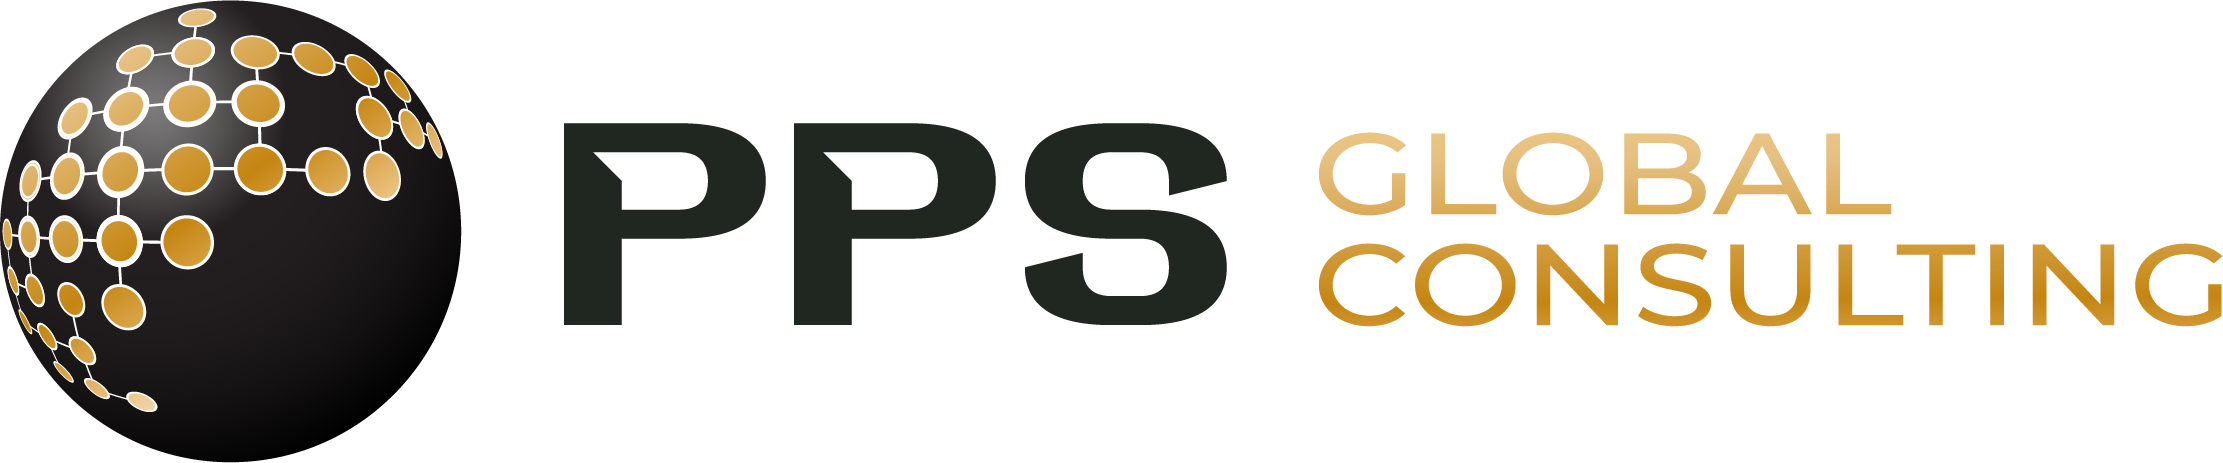 PPS Global Consulting LLC